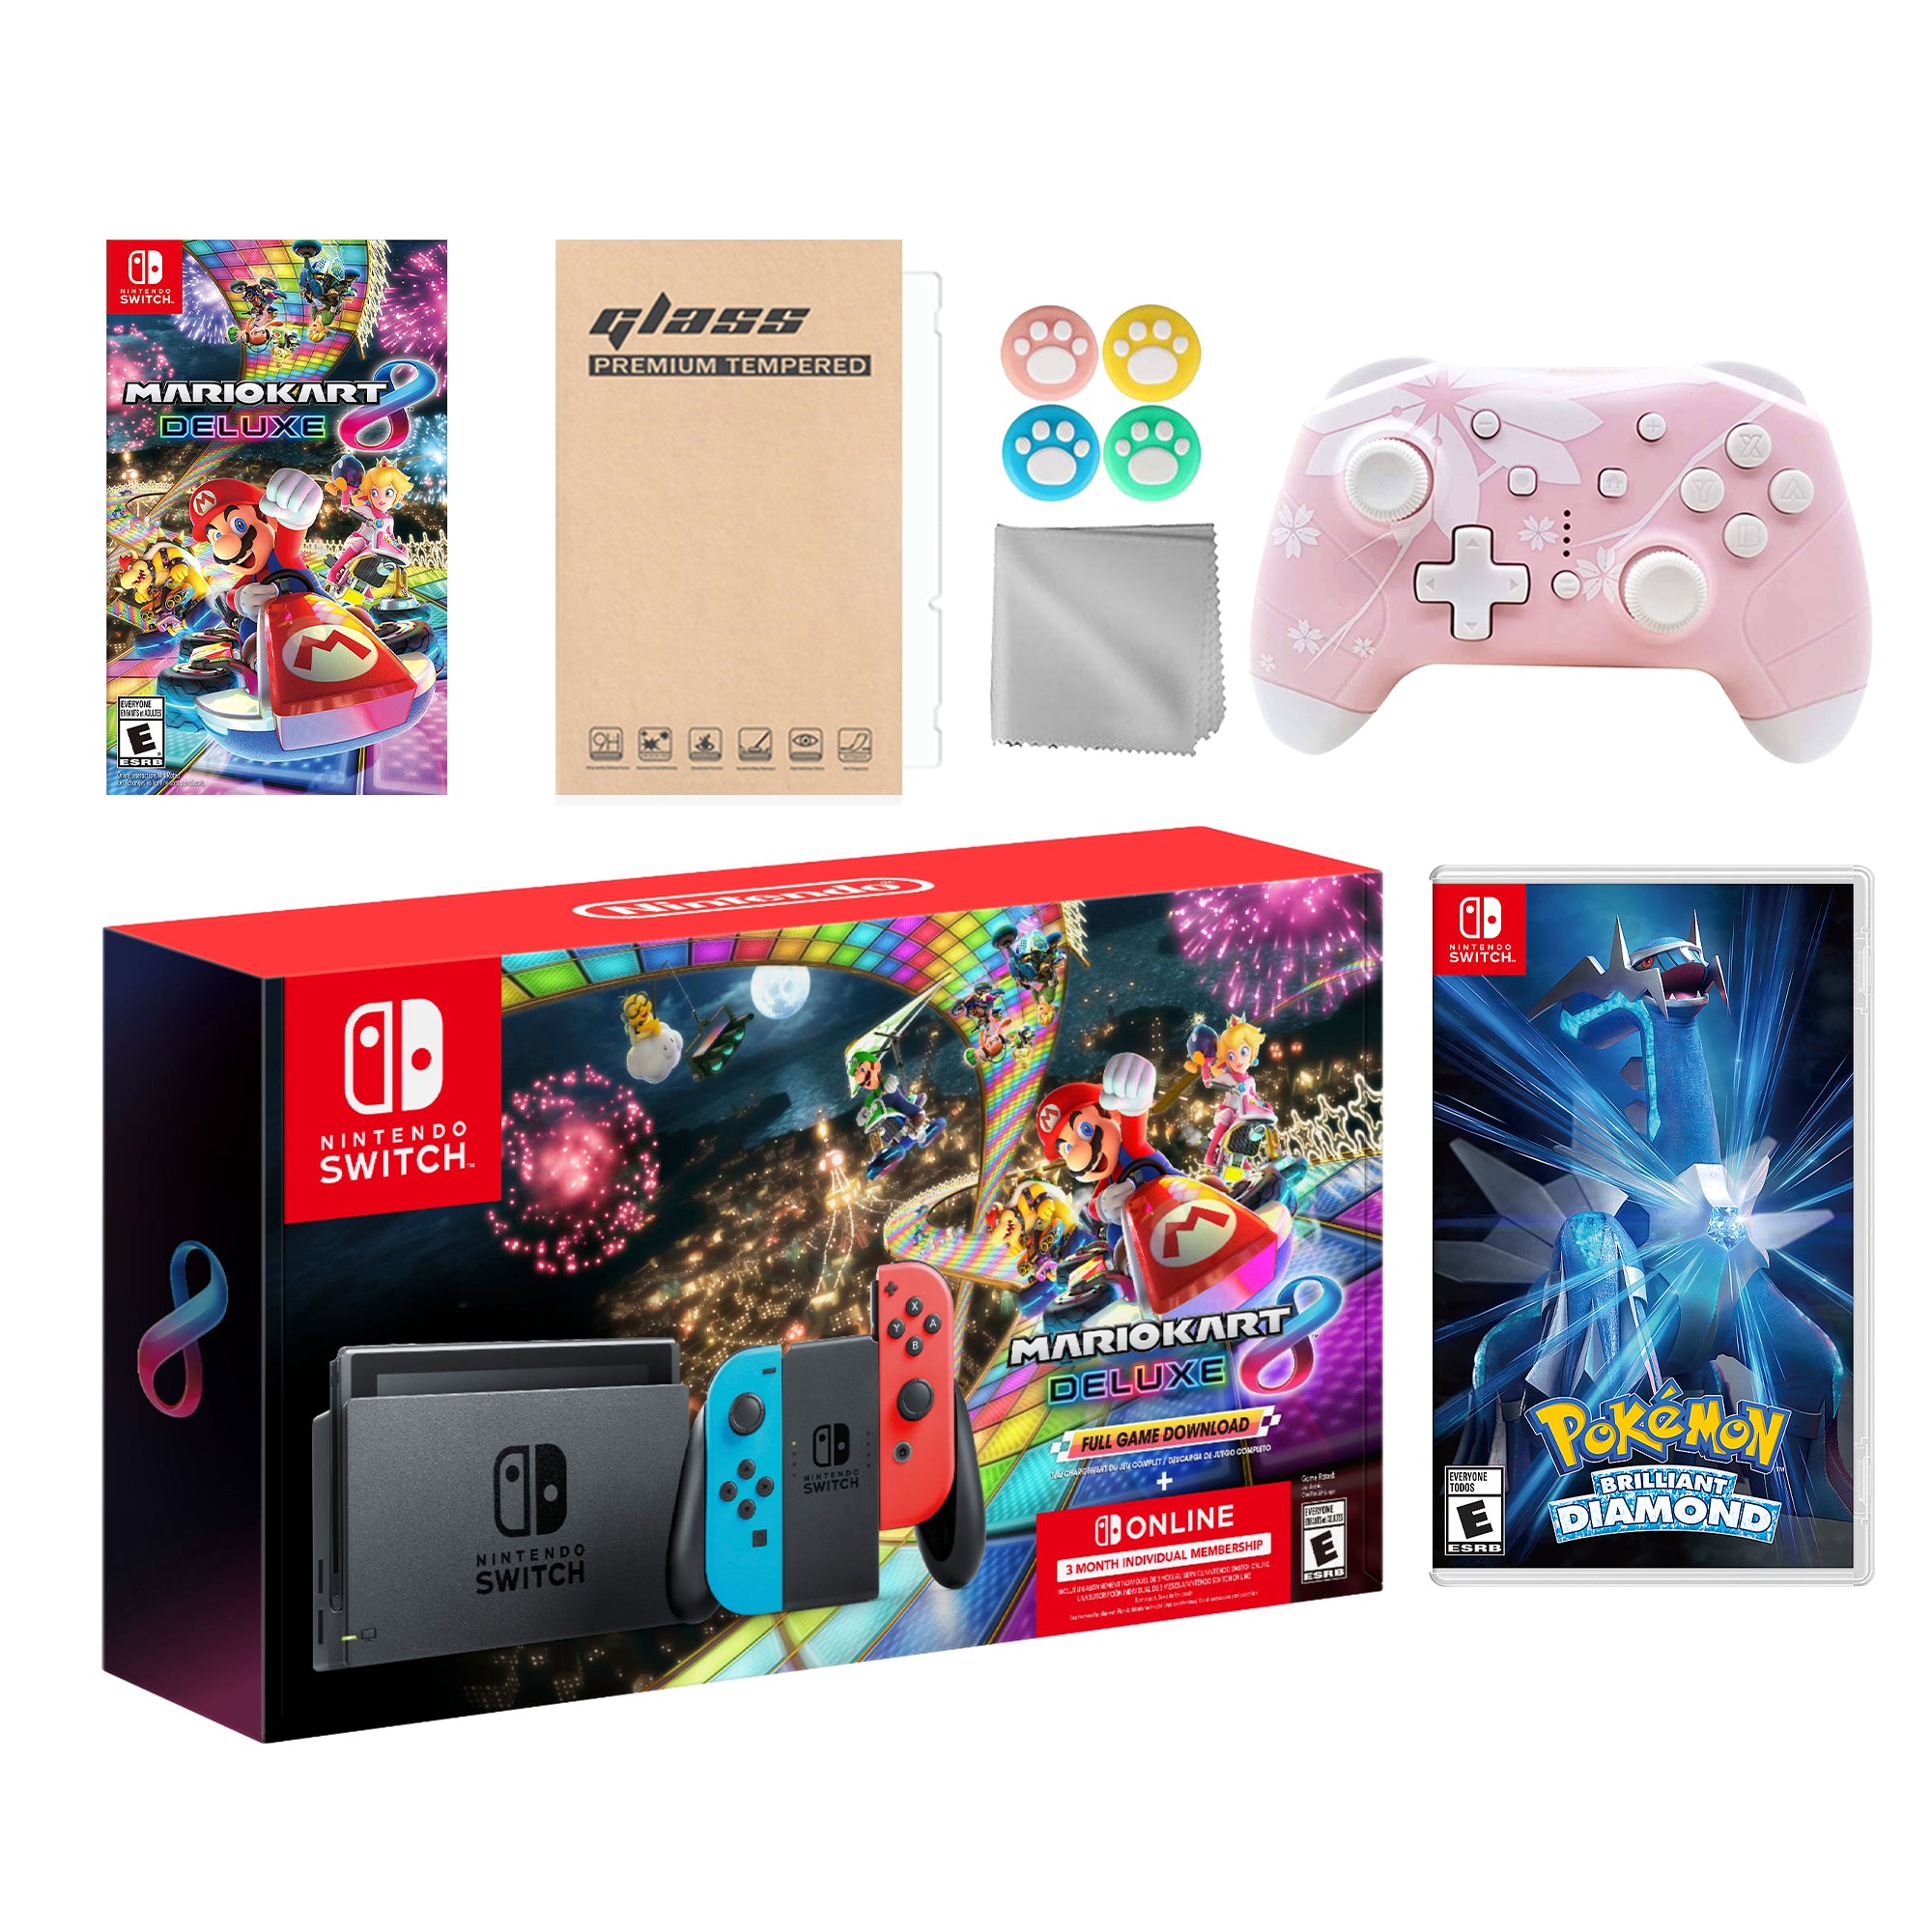 Nintendo Switch Mario Kart 8 Deluxe Bundle: Red Blue Console, Mario Kart 8 & Membership, Pokemon Brilliant Diamond, Mytrix Wireless Pro Controller Pink Cherry Blossom and Accessories